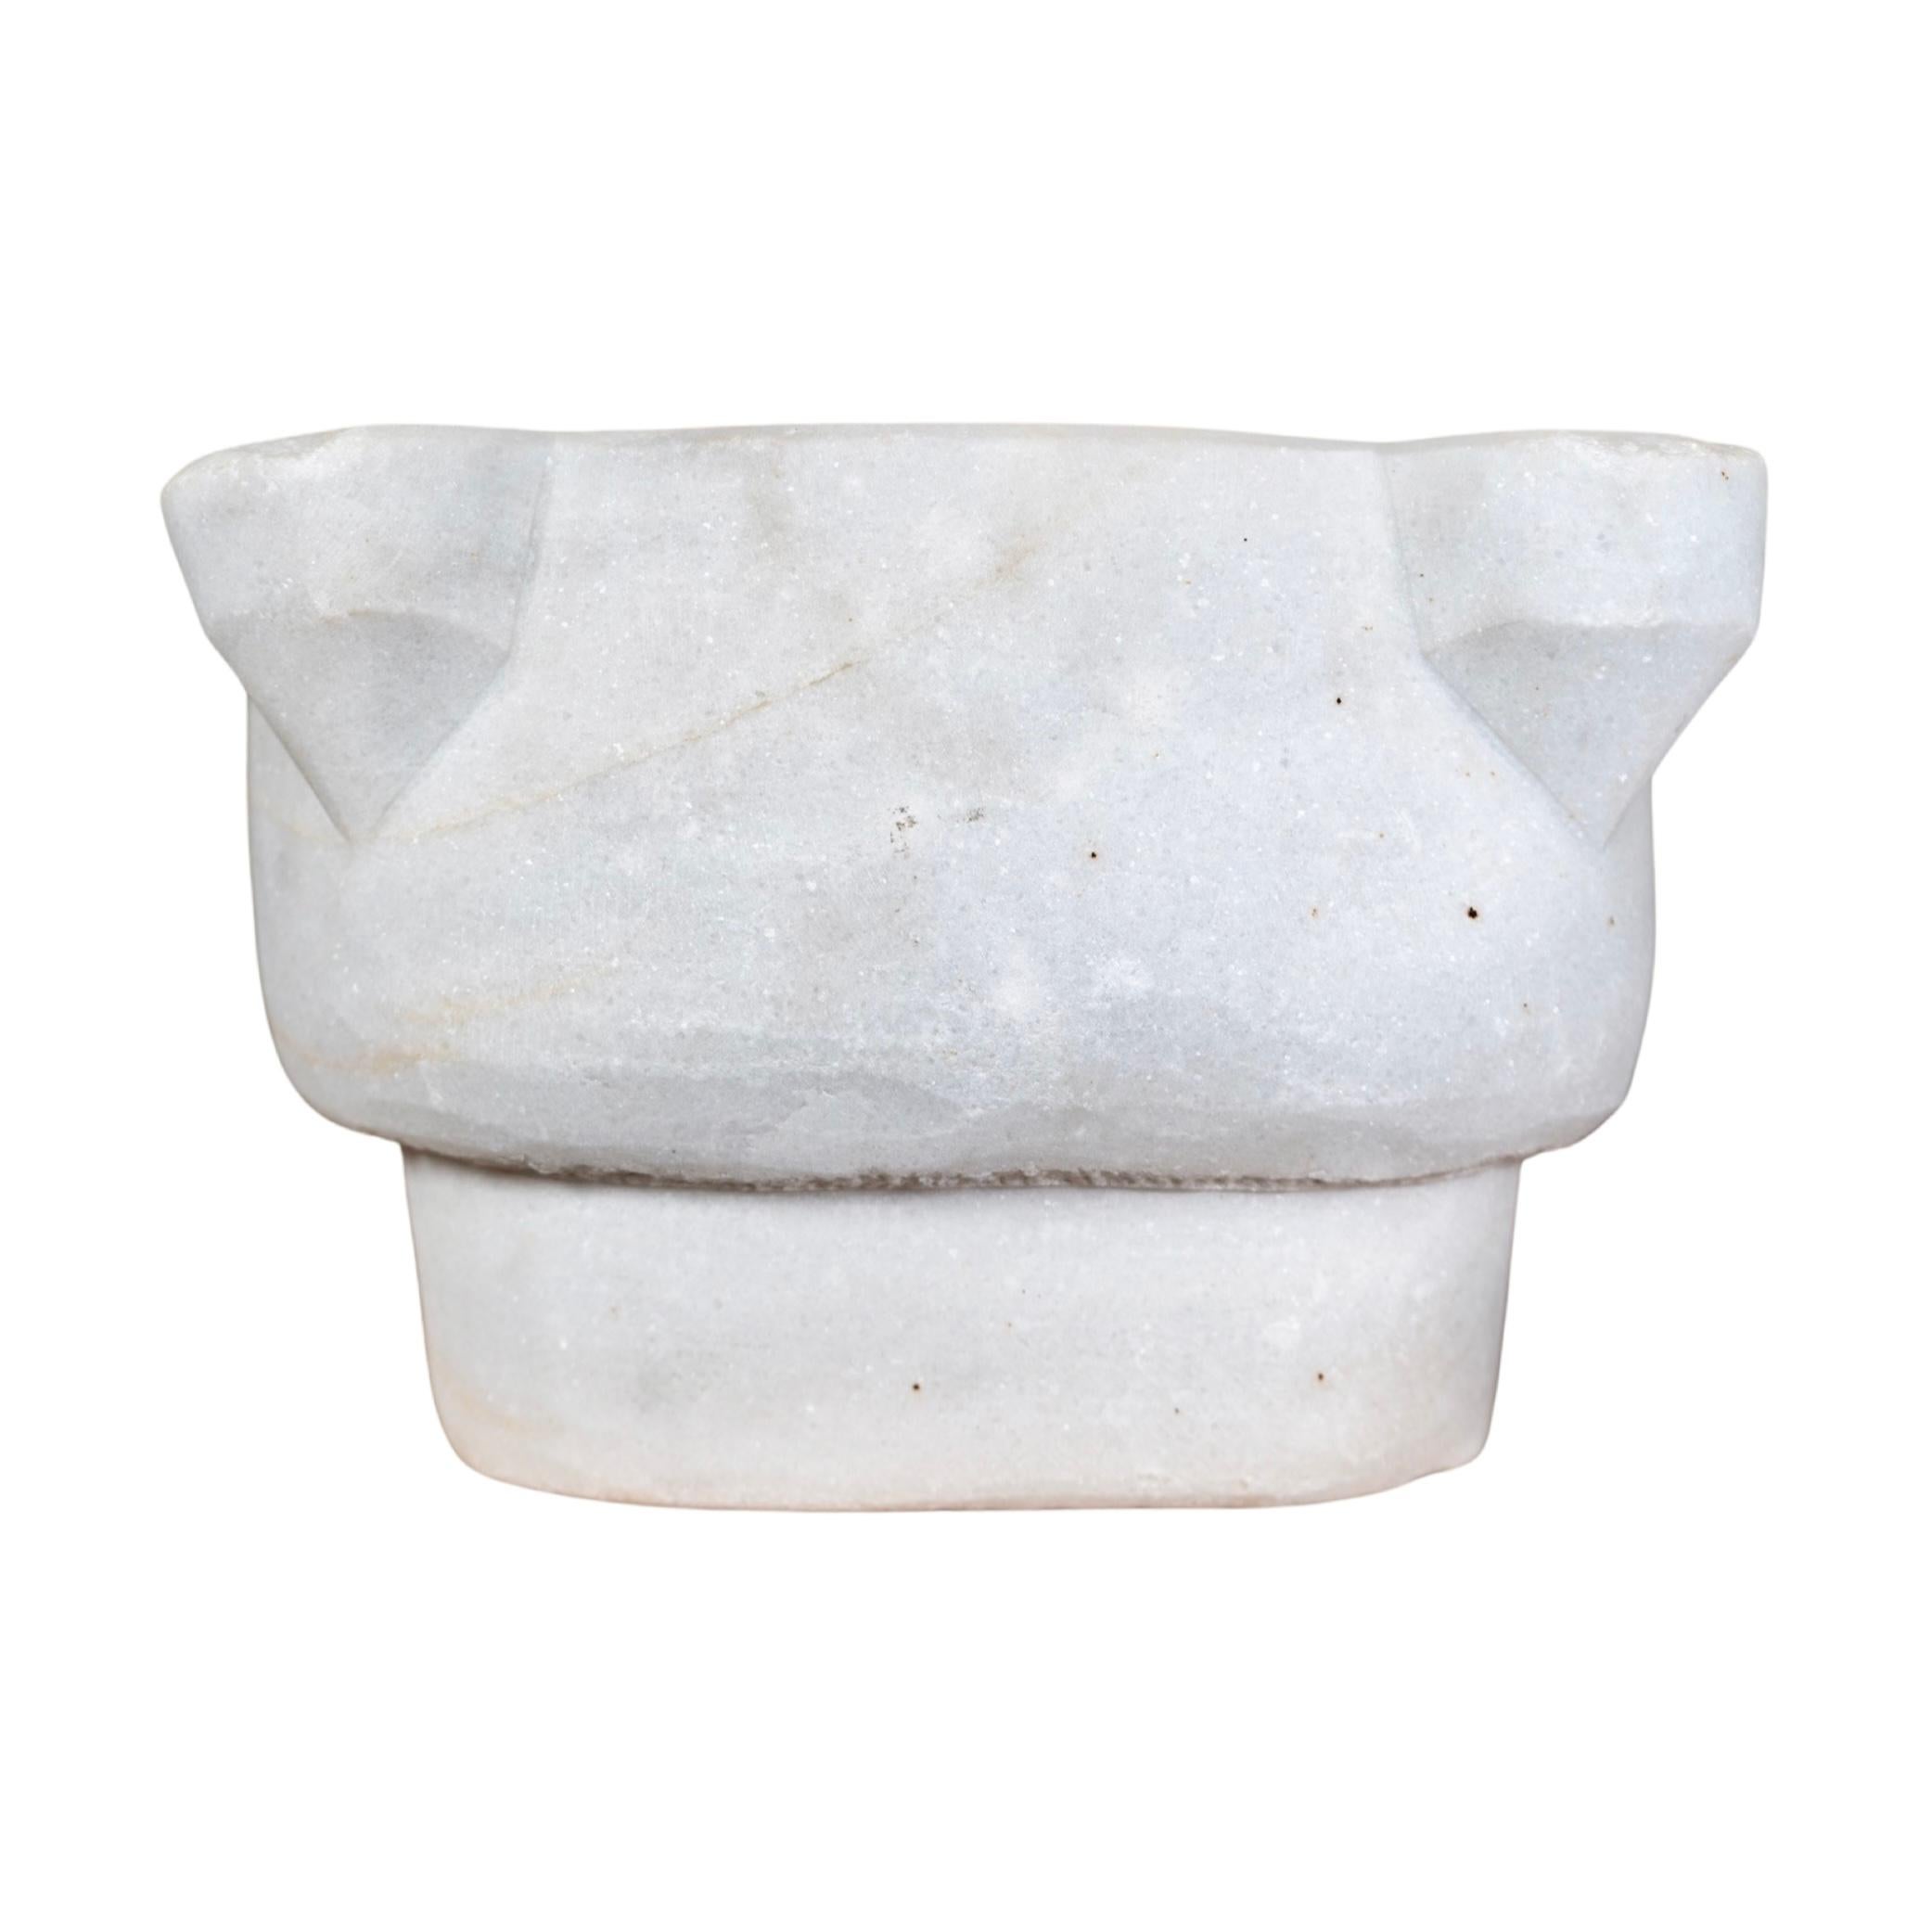 Mid-19th Century Greece White Veined Carrara Marble Sink For Sale